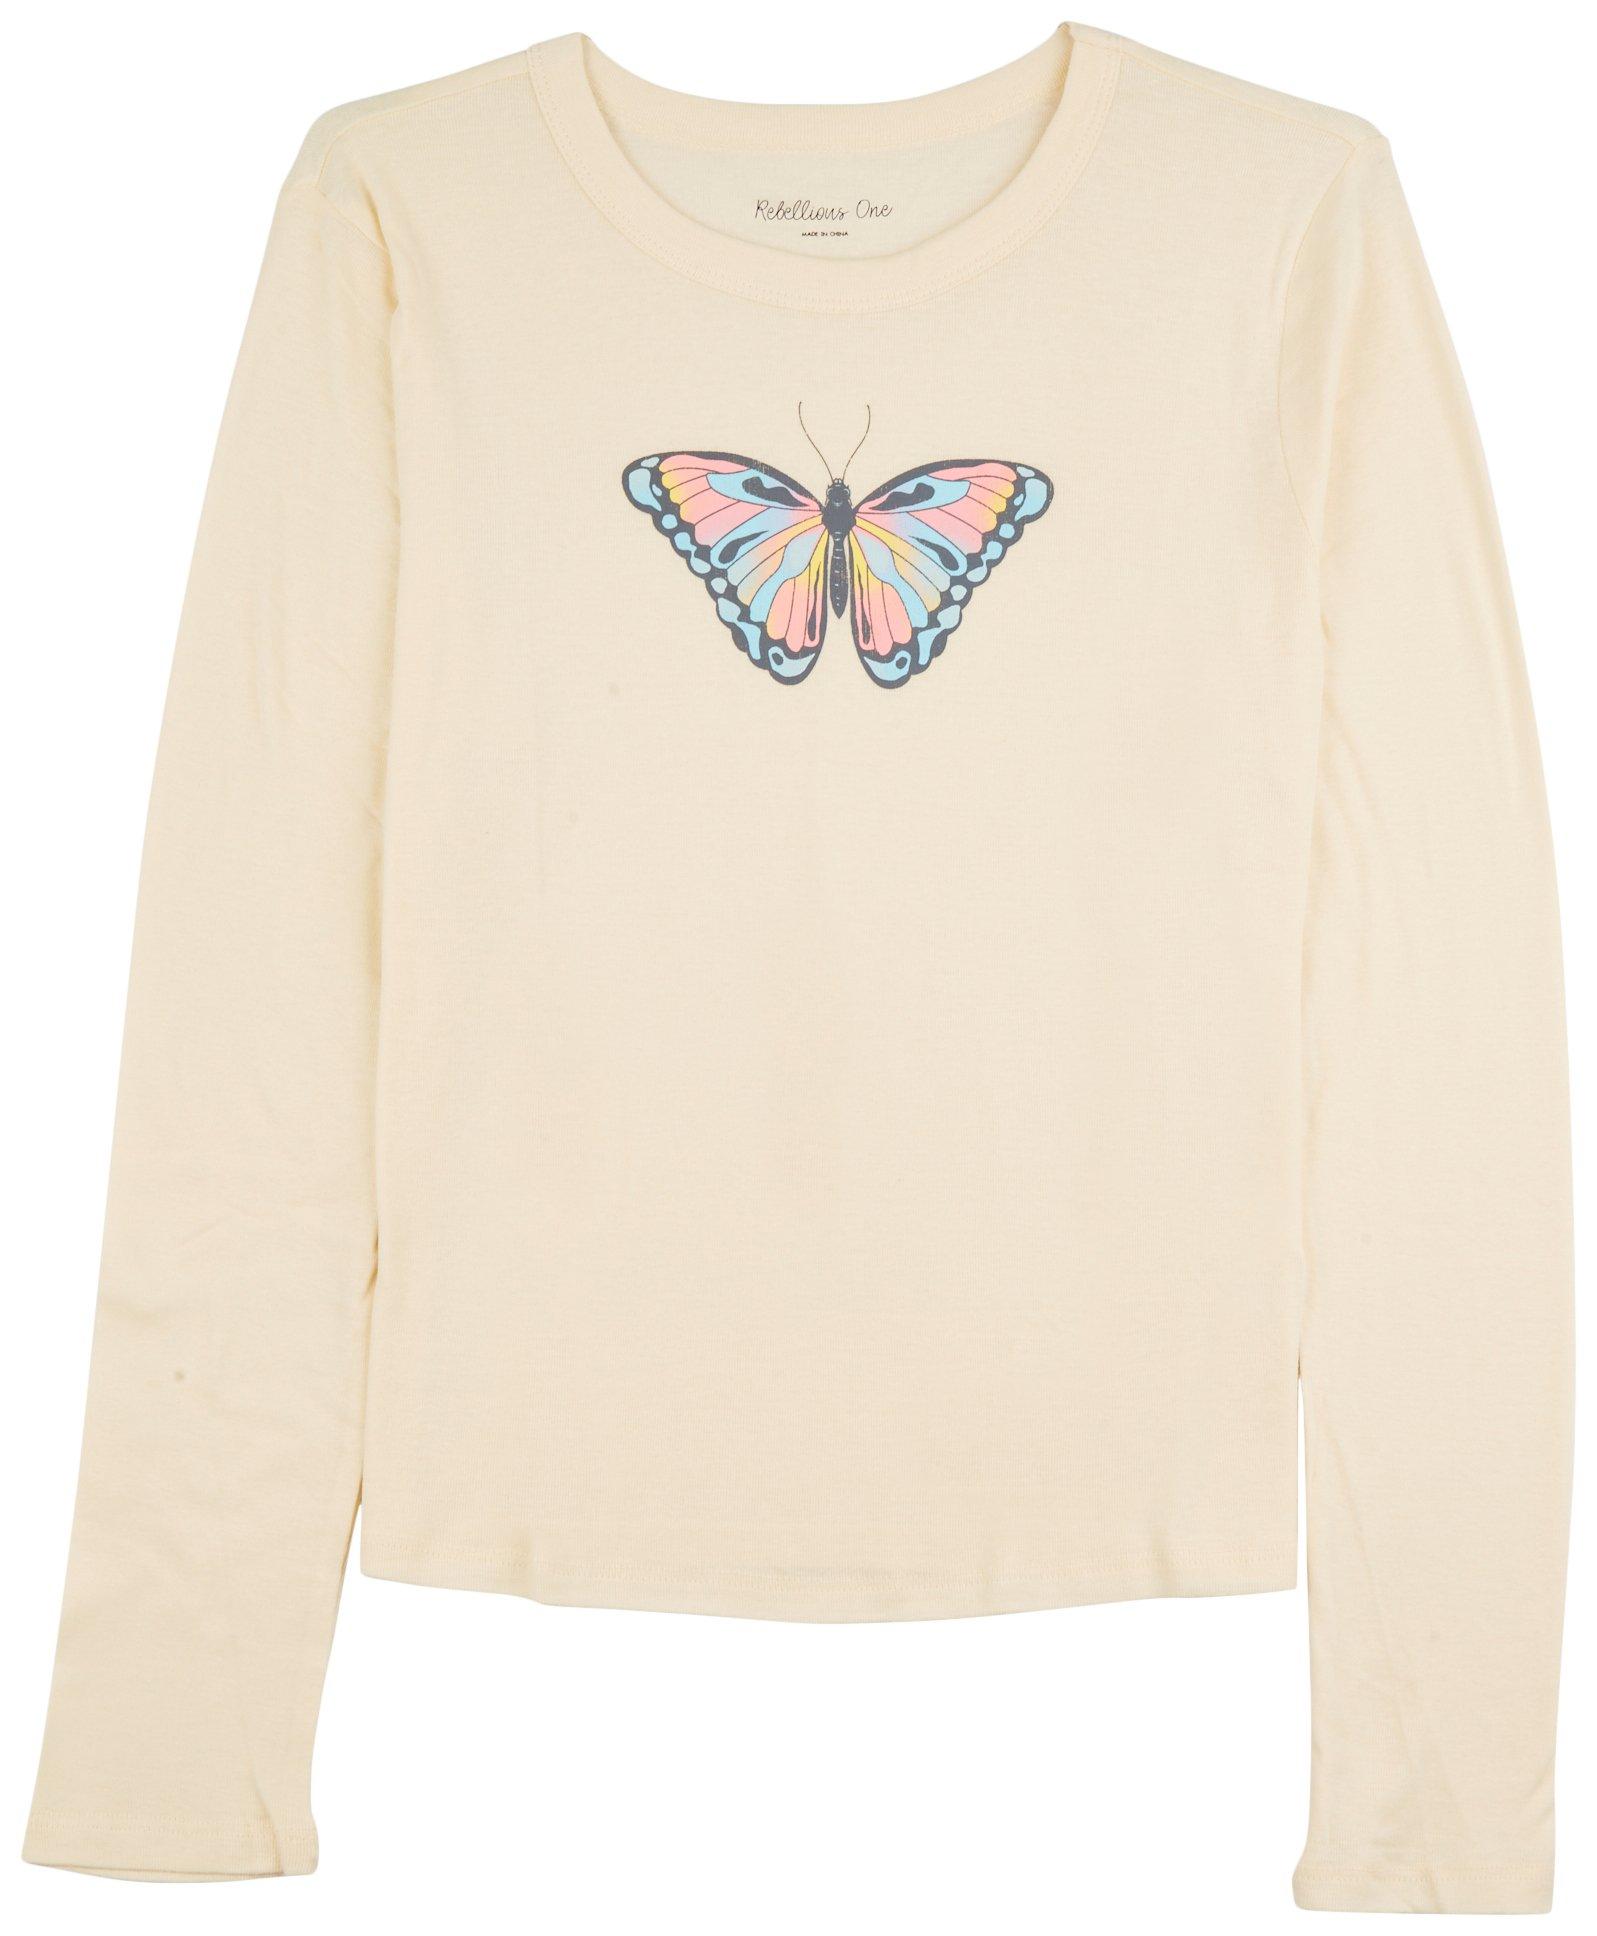 Rebellious One Juniors Butterfly Long Sleeve